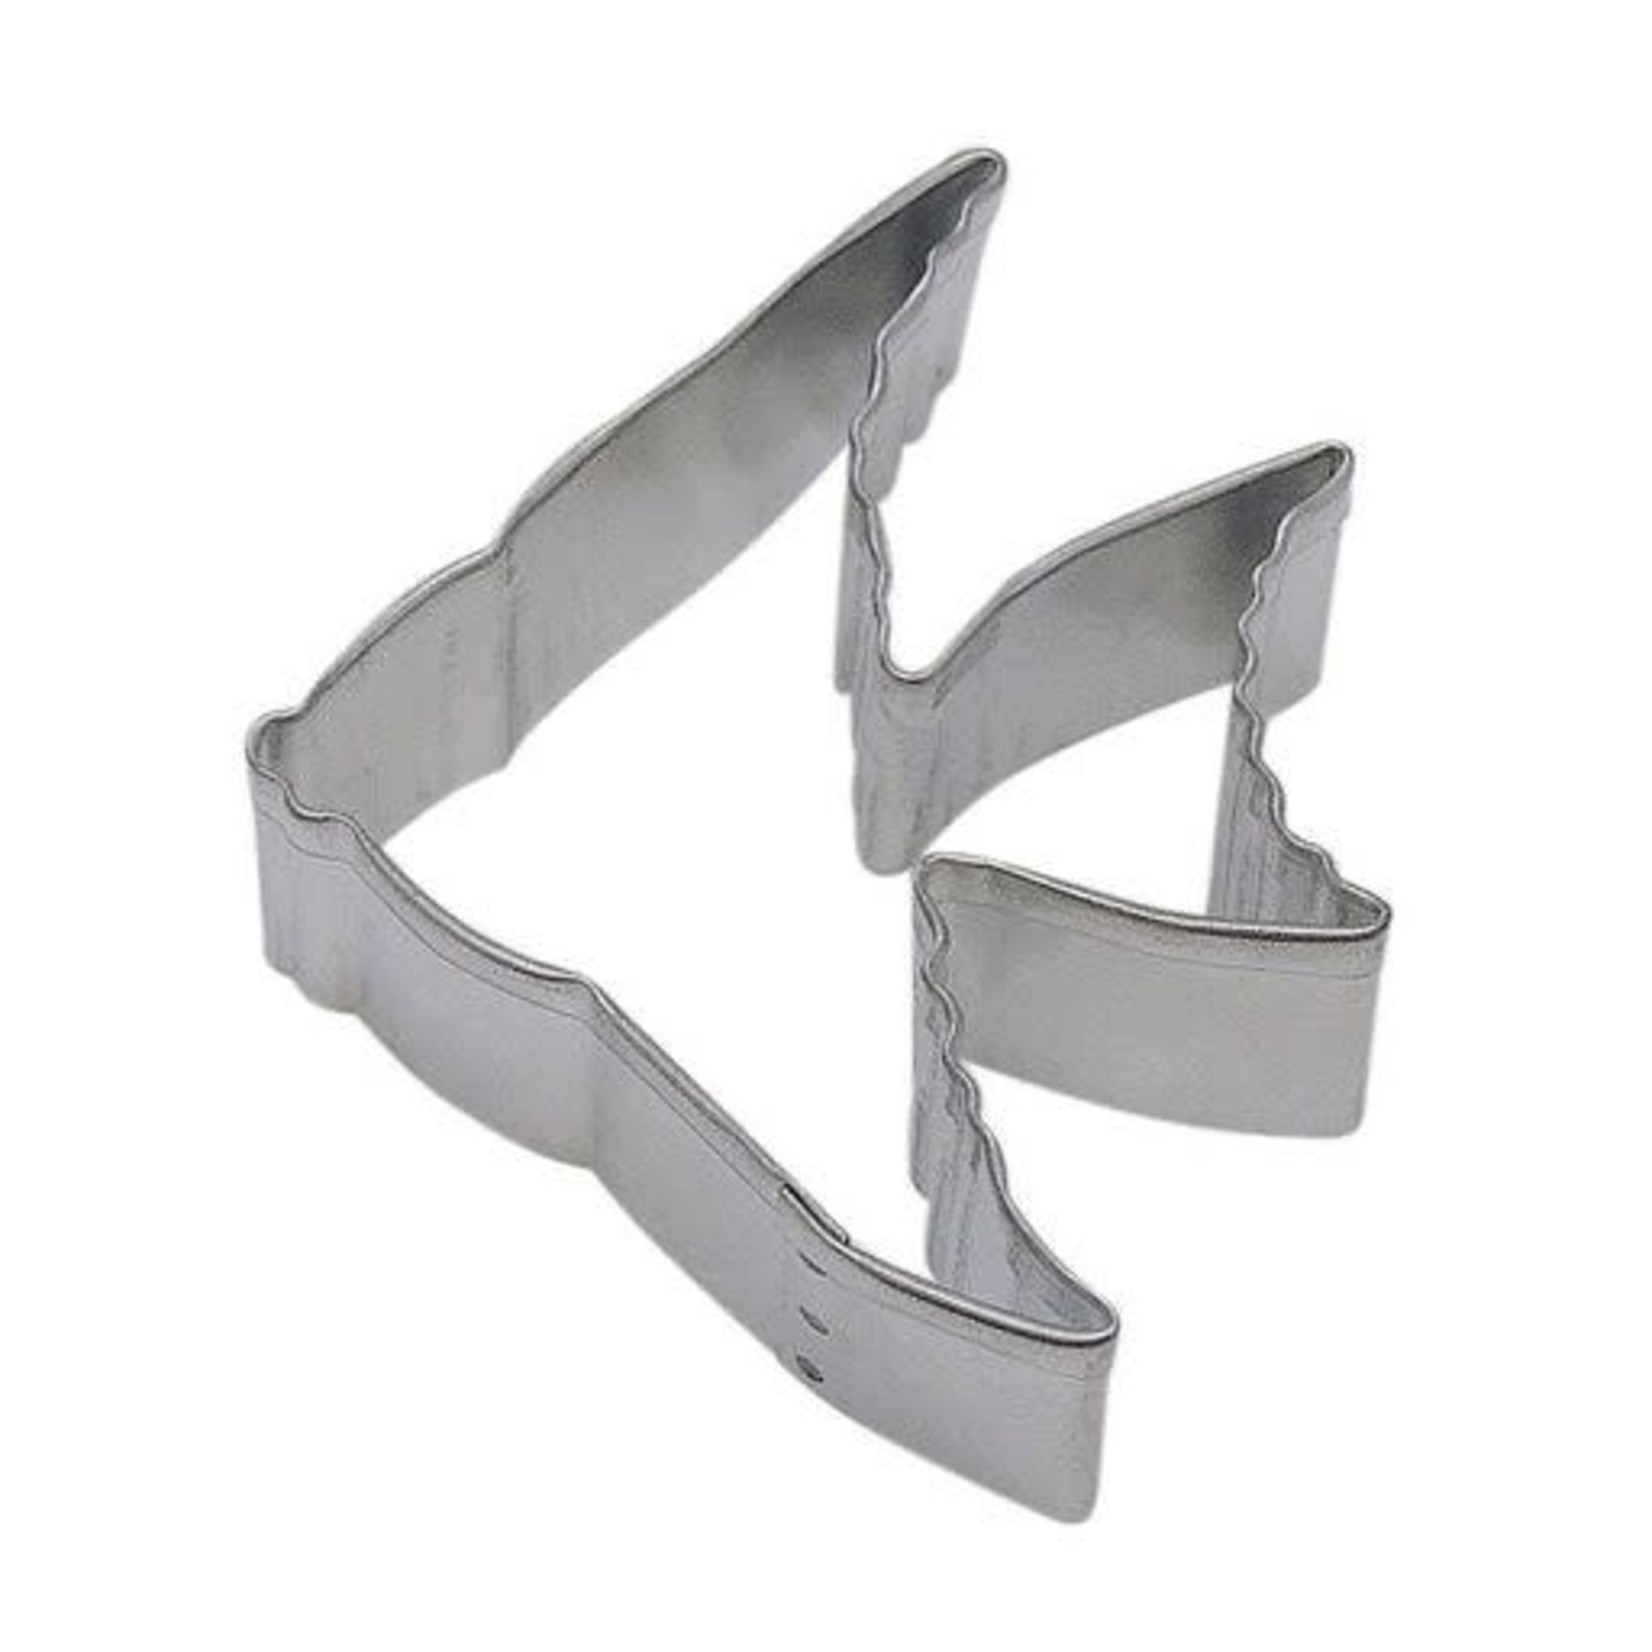 3.5" Angel Fish Cookie Cutter